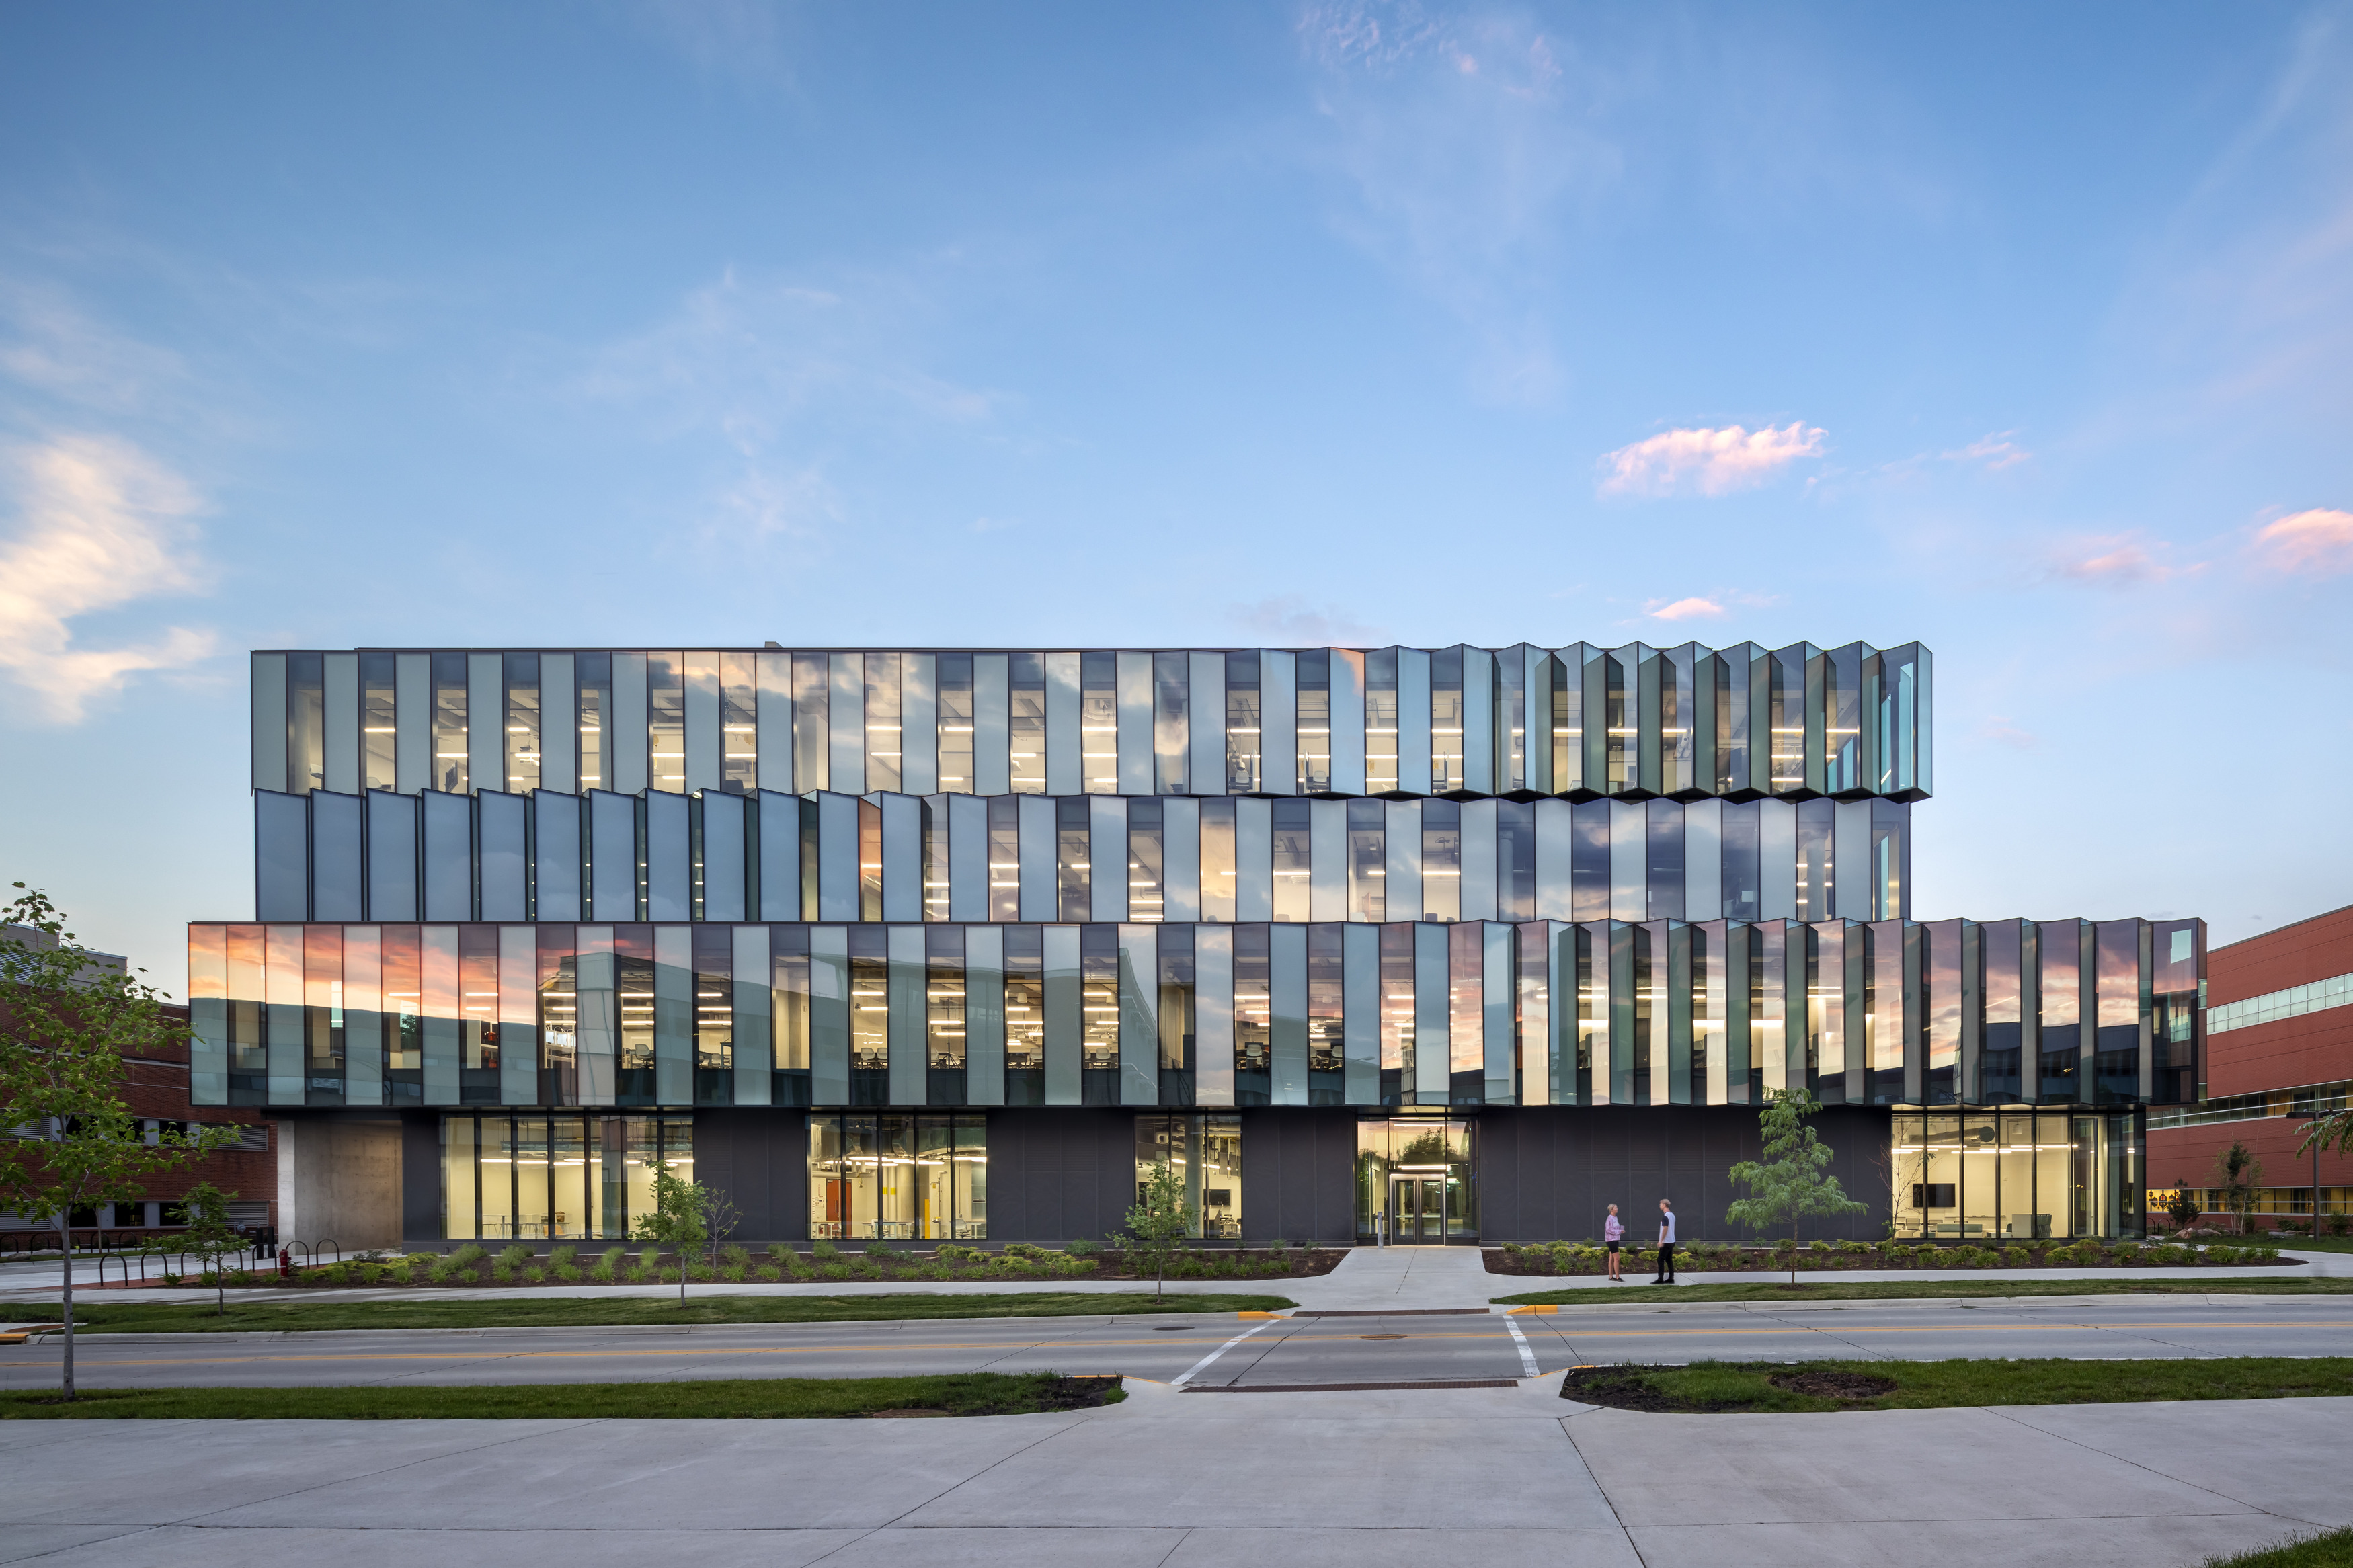 <p>The Student Innovation Center serves as a hub and gateway for innovation on ISU's campus. The Center's design is a direct acknowledgment to the sophistication of the university's contributions to technology and innovation, and the shining, high-performance envelope reflects the quality of collaborative connections made inside the building. | <small>&copy; Peter Aaron/OTTO</small></p>